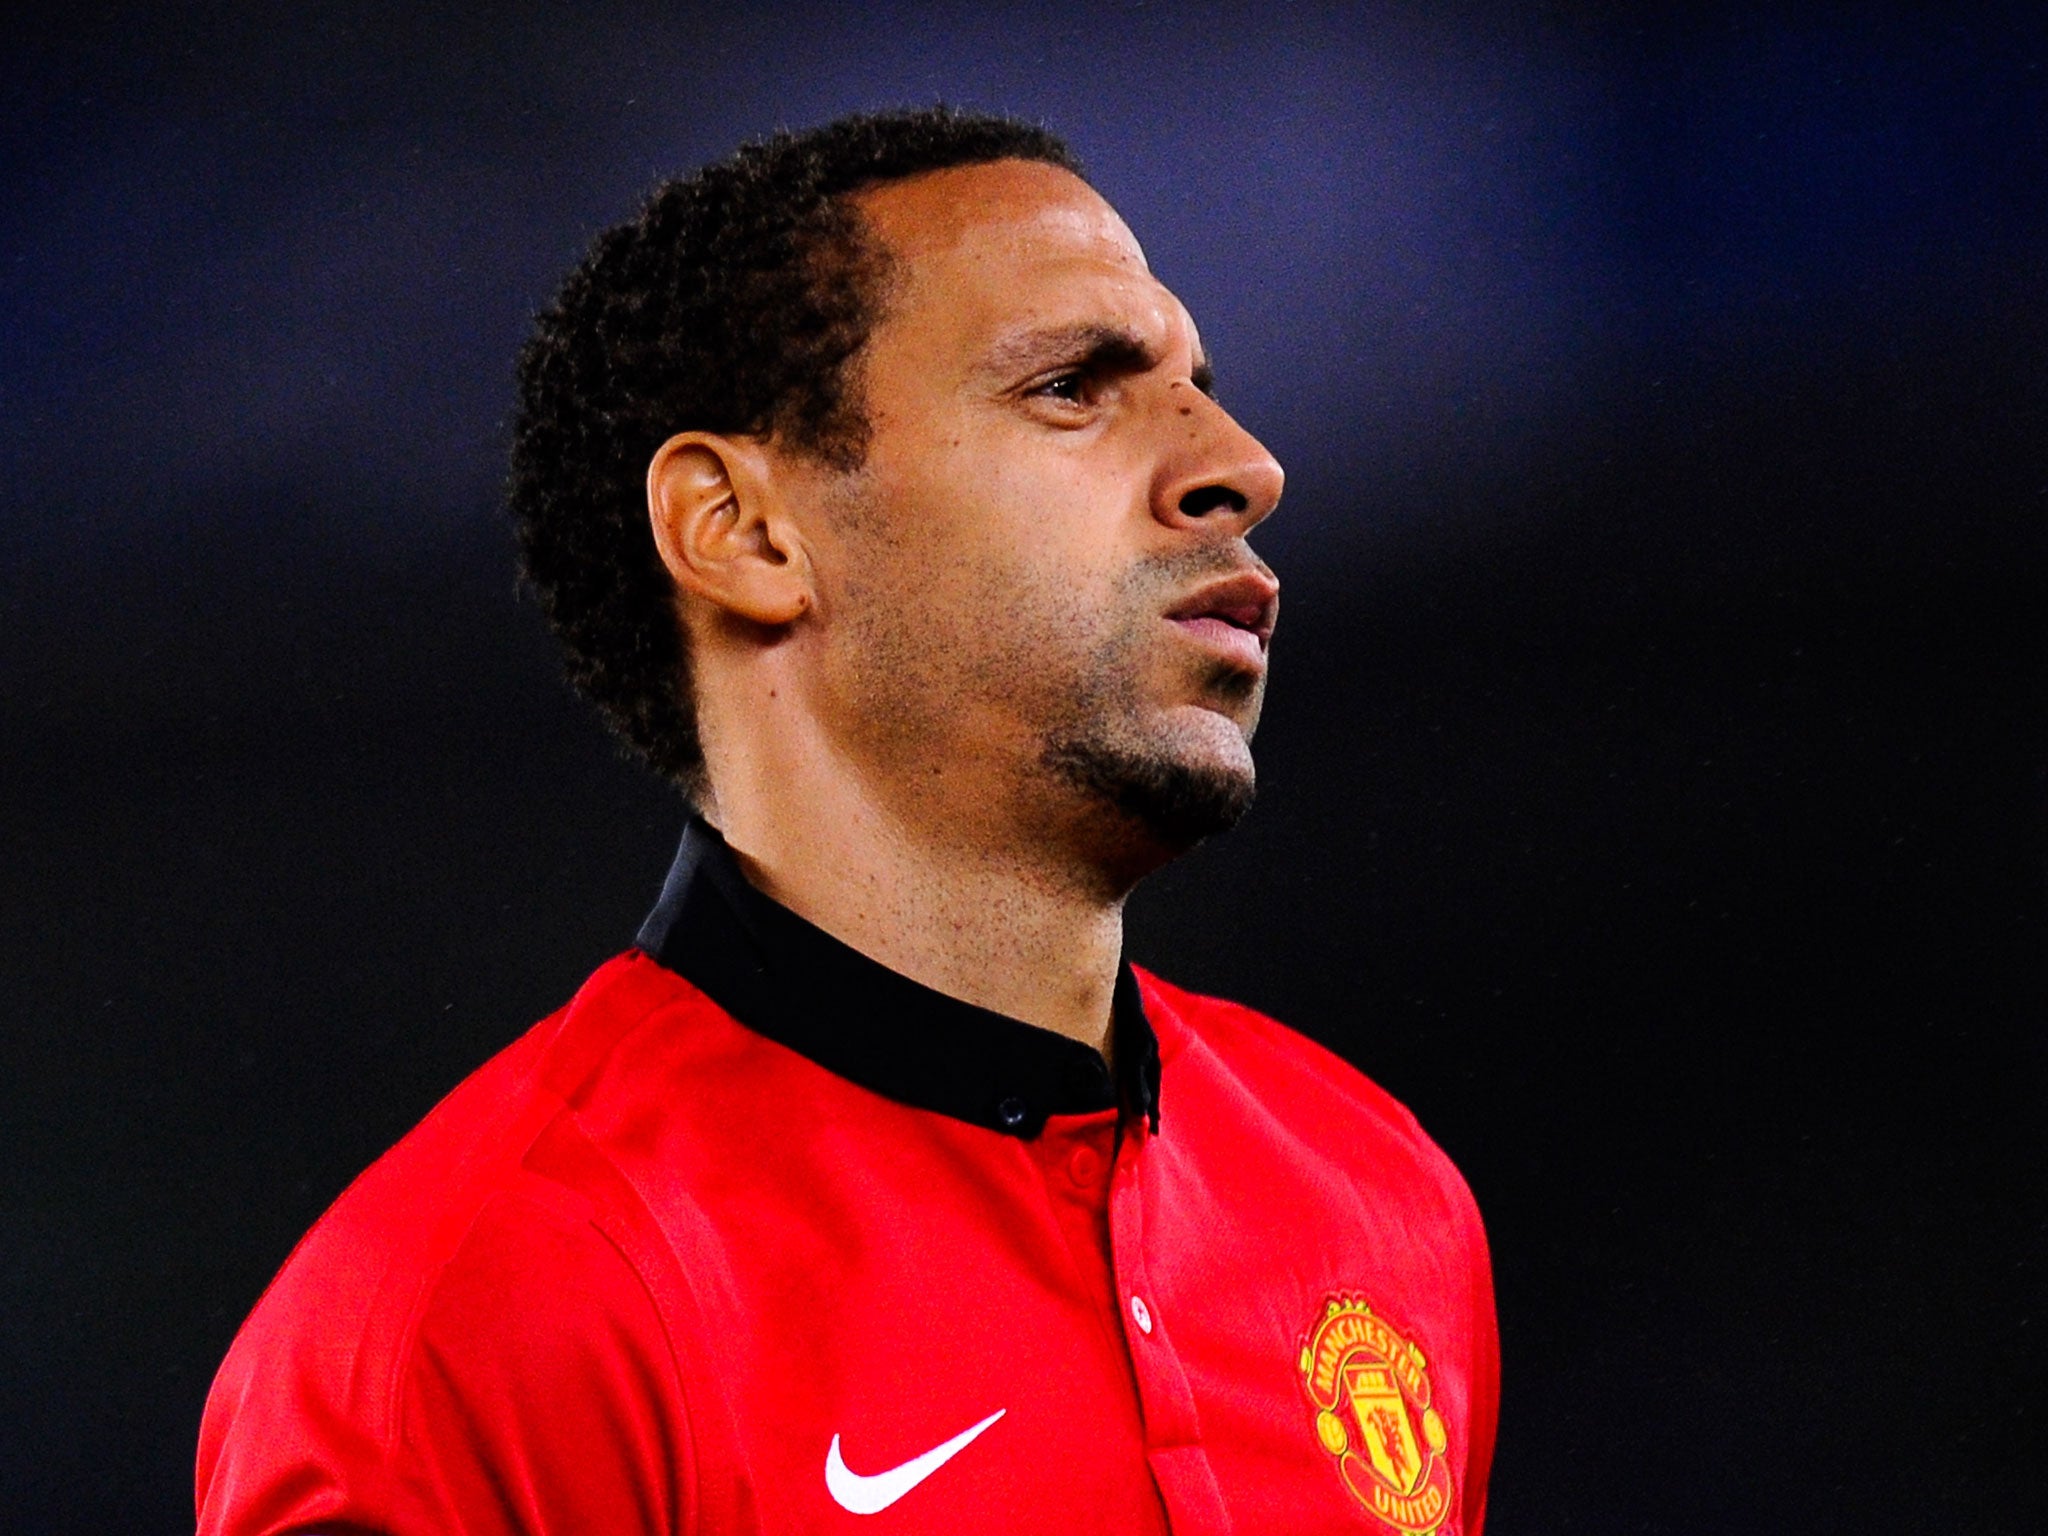 Manchester United defender Rio Ferdinand has claimed that the current Premier League table will count for nothing when May comes around